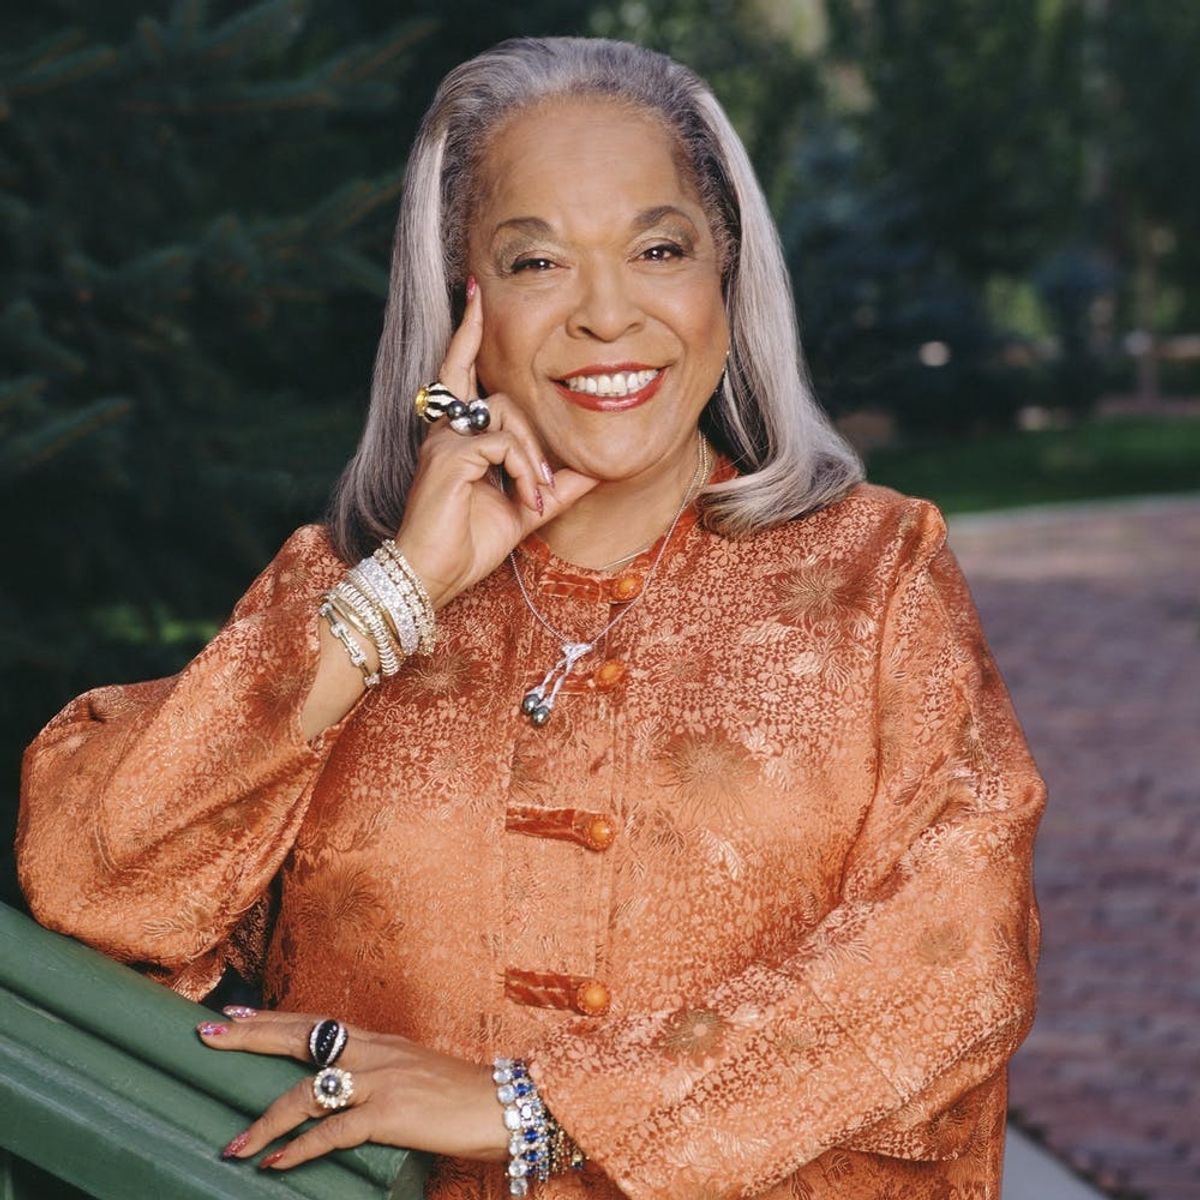 “Touched by an Angel” Star Della Reese Has Died at Age 86